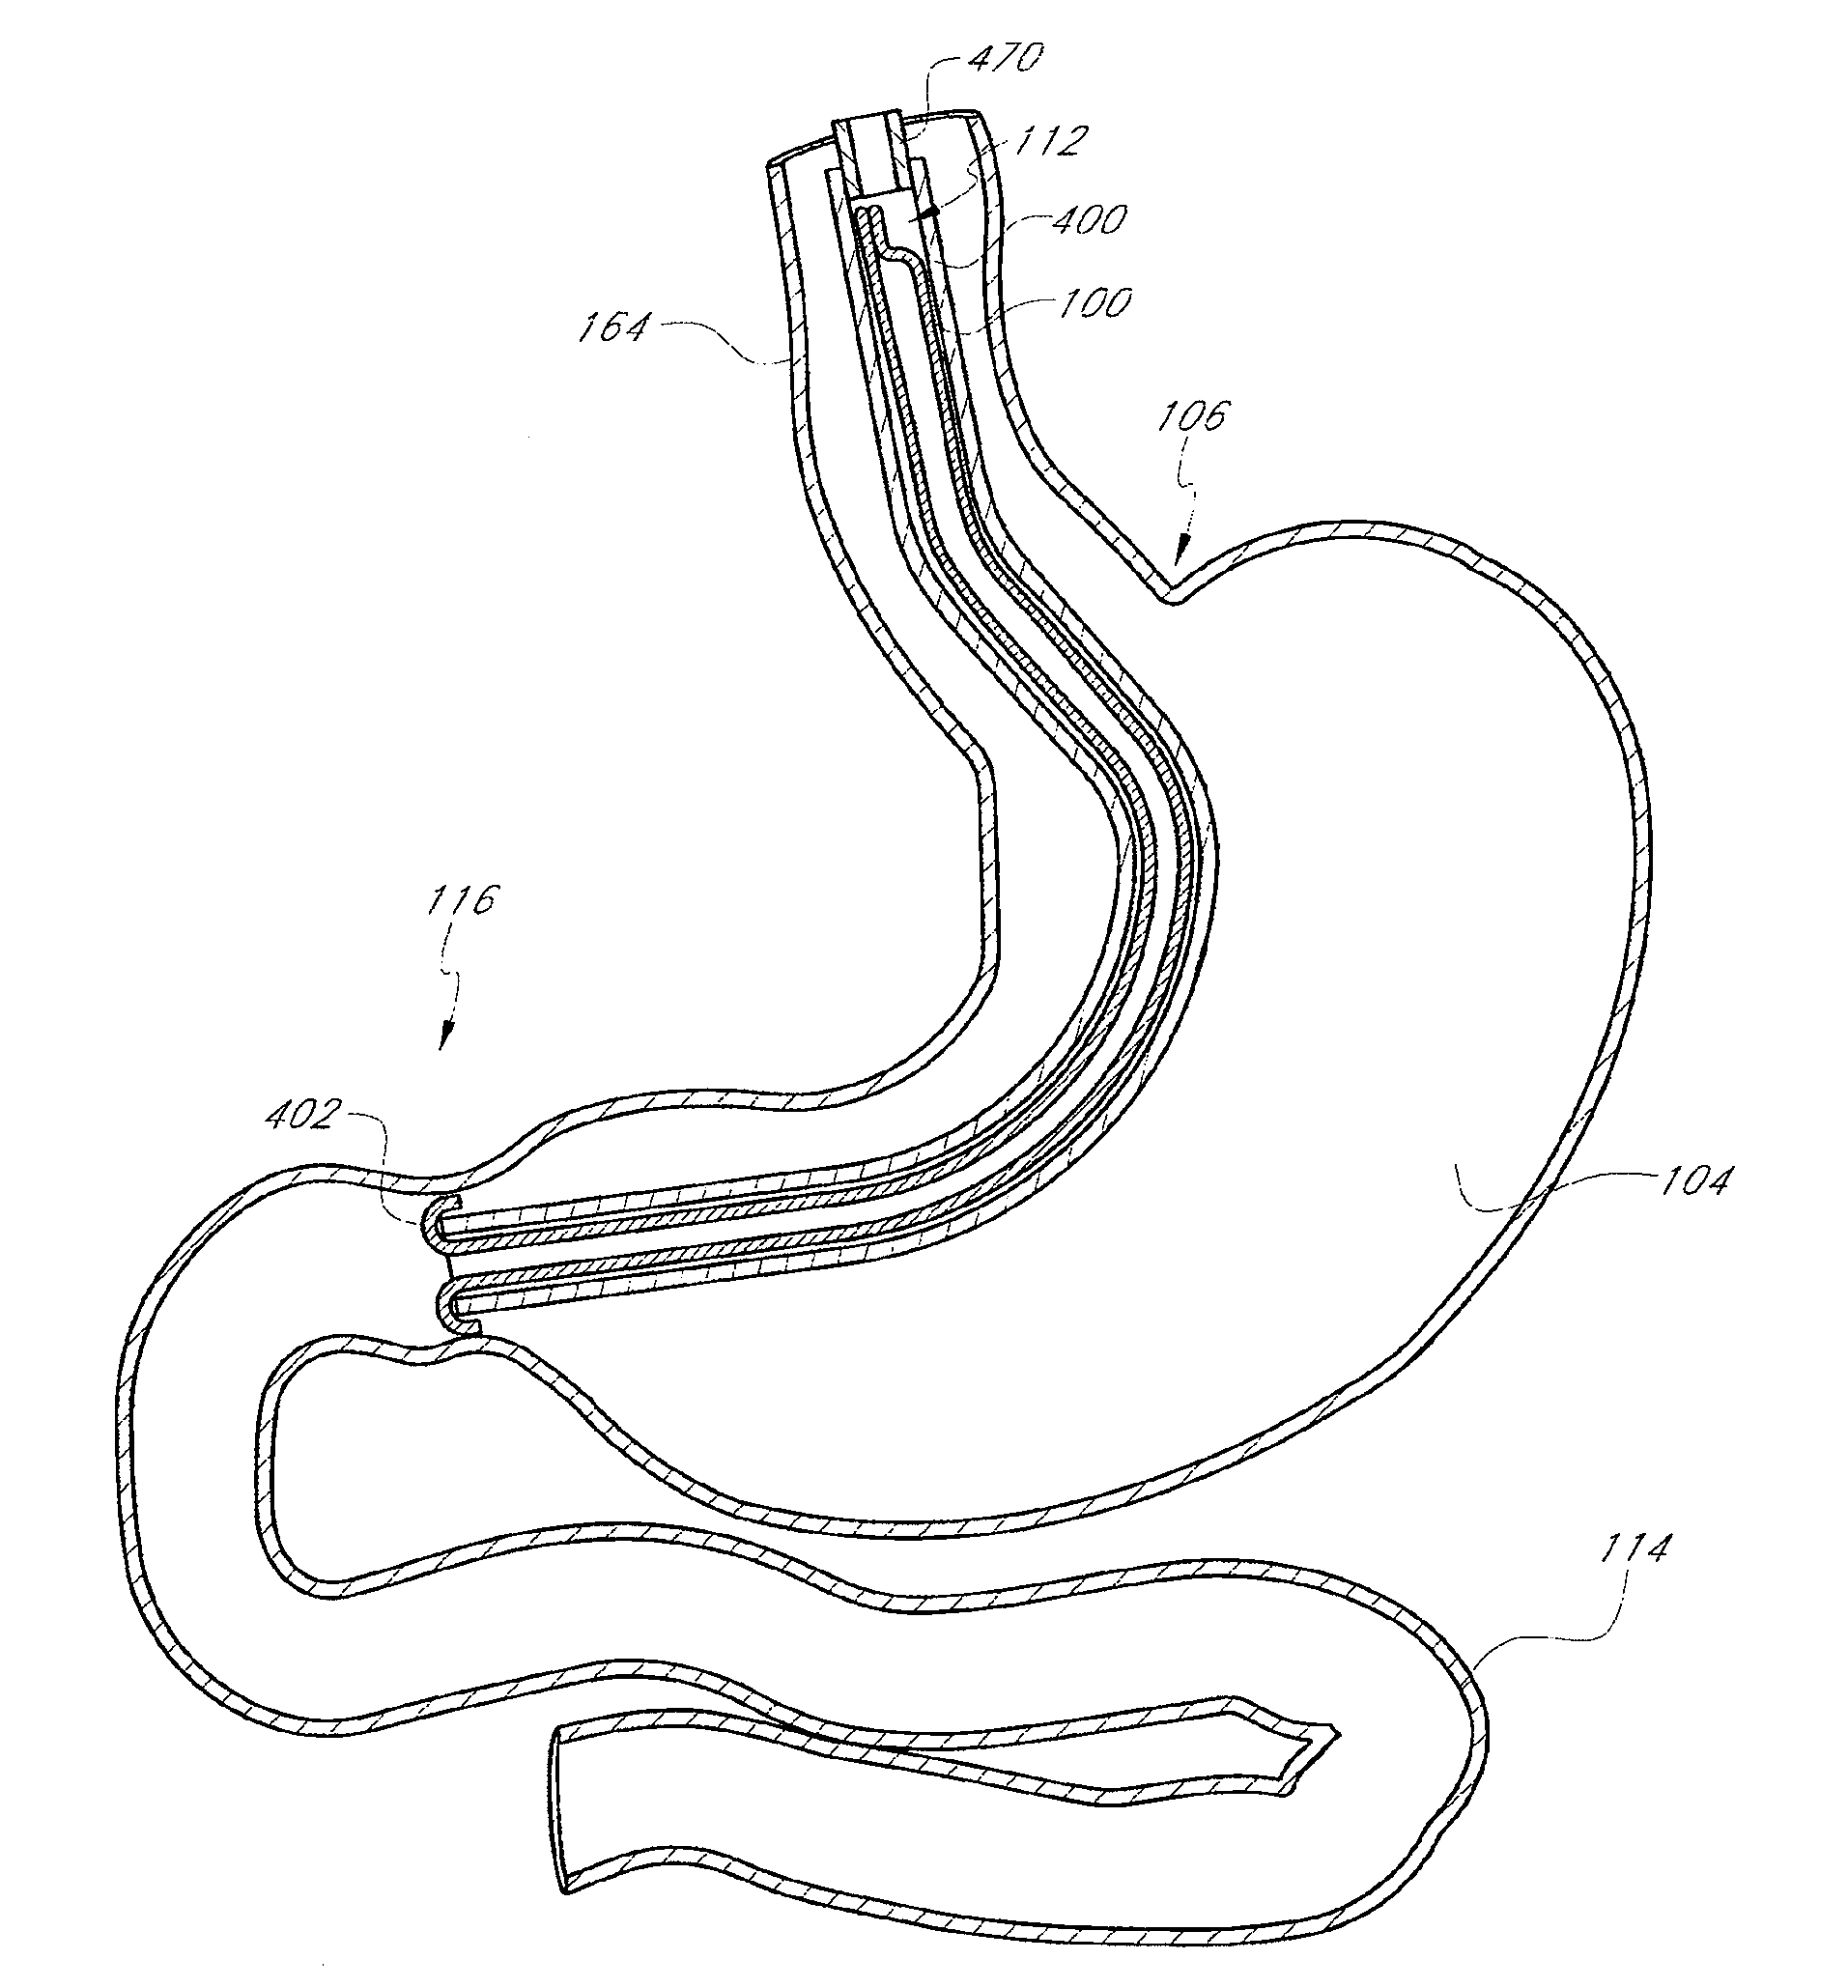 Toposcopic methods and devices for delivering a sleeve having axially compressed and elongate configurations